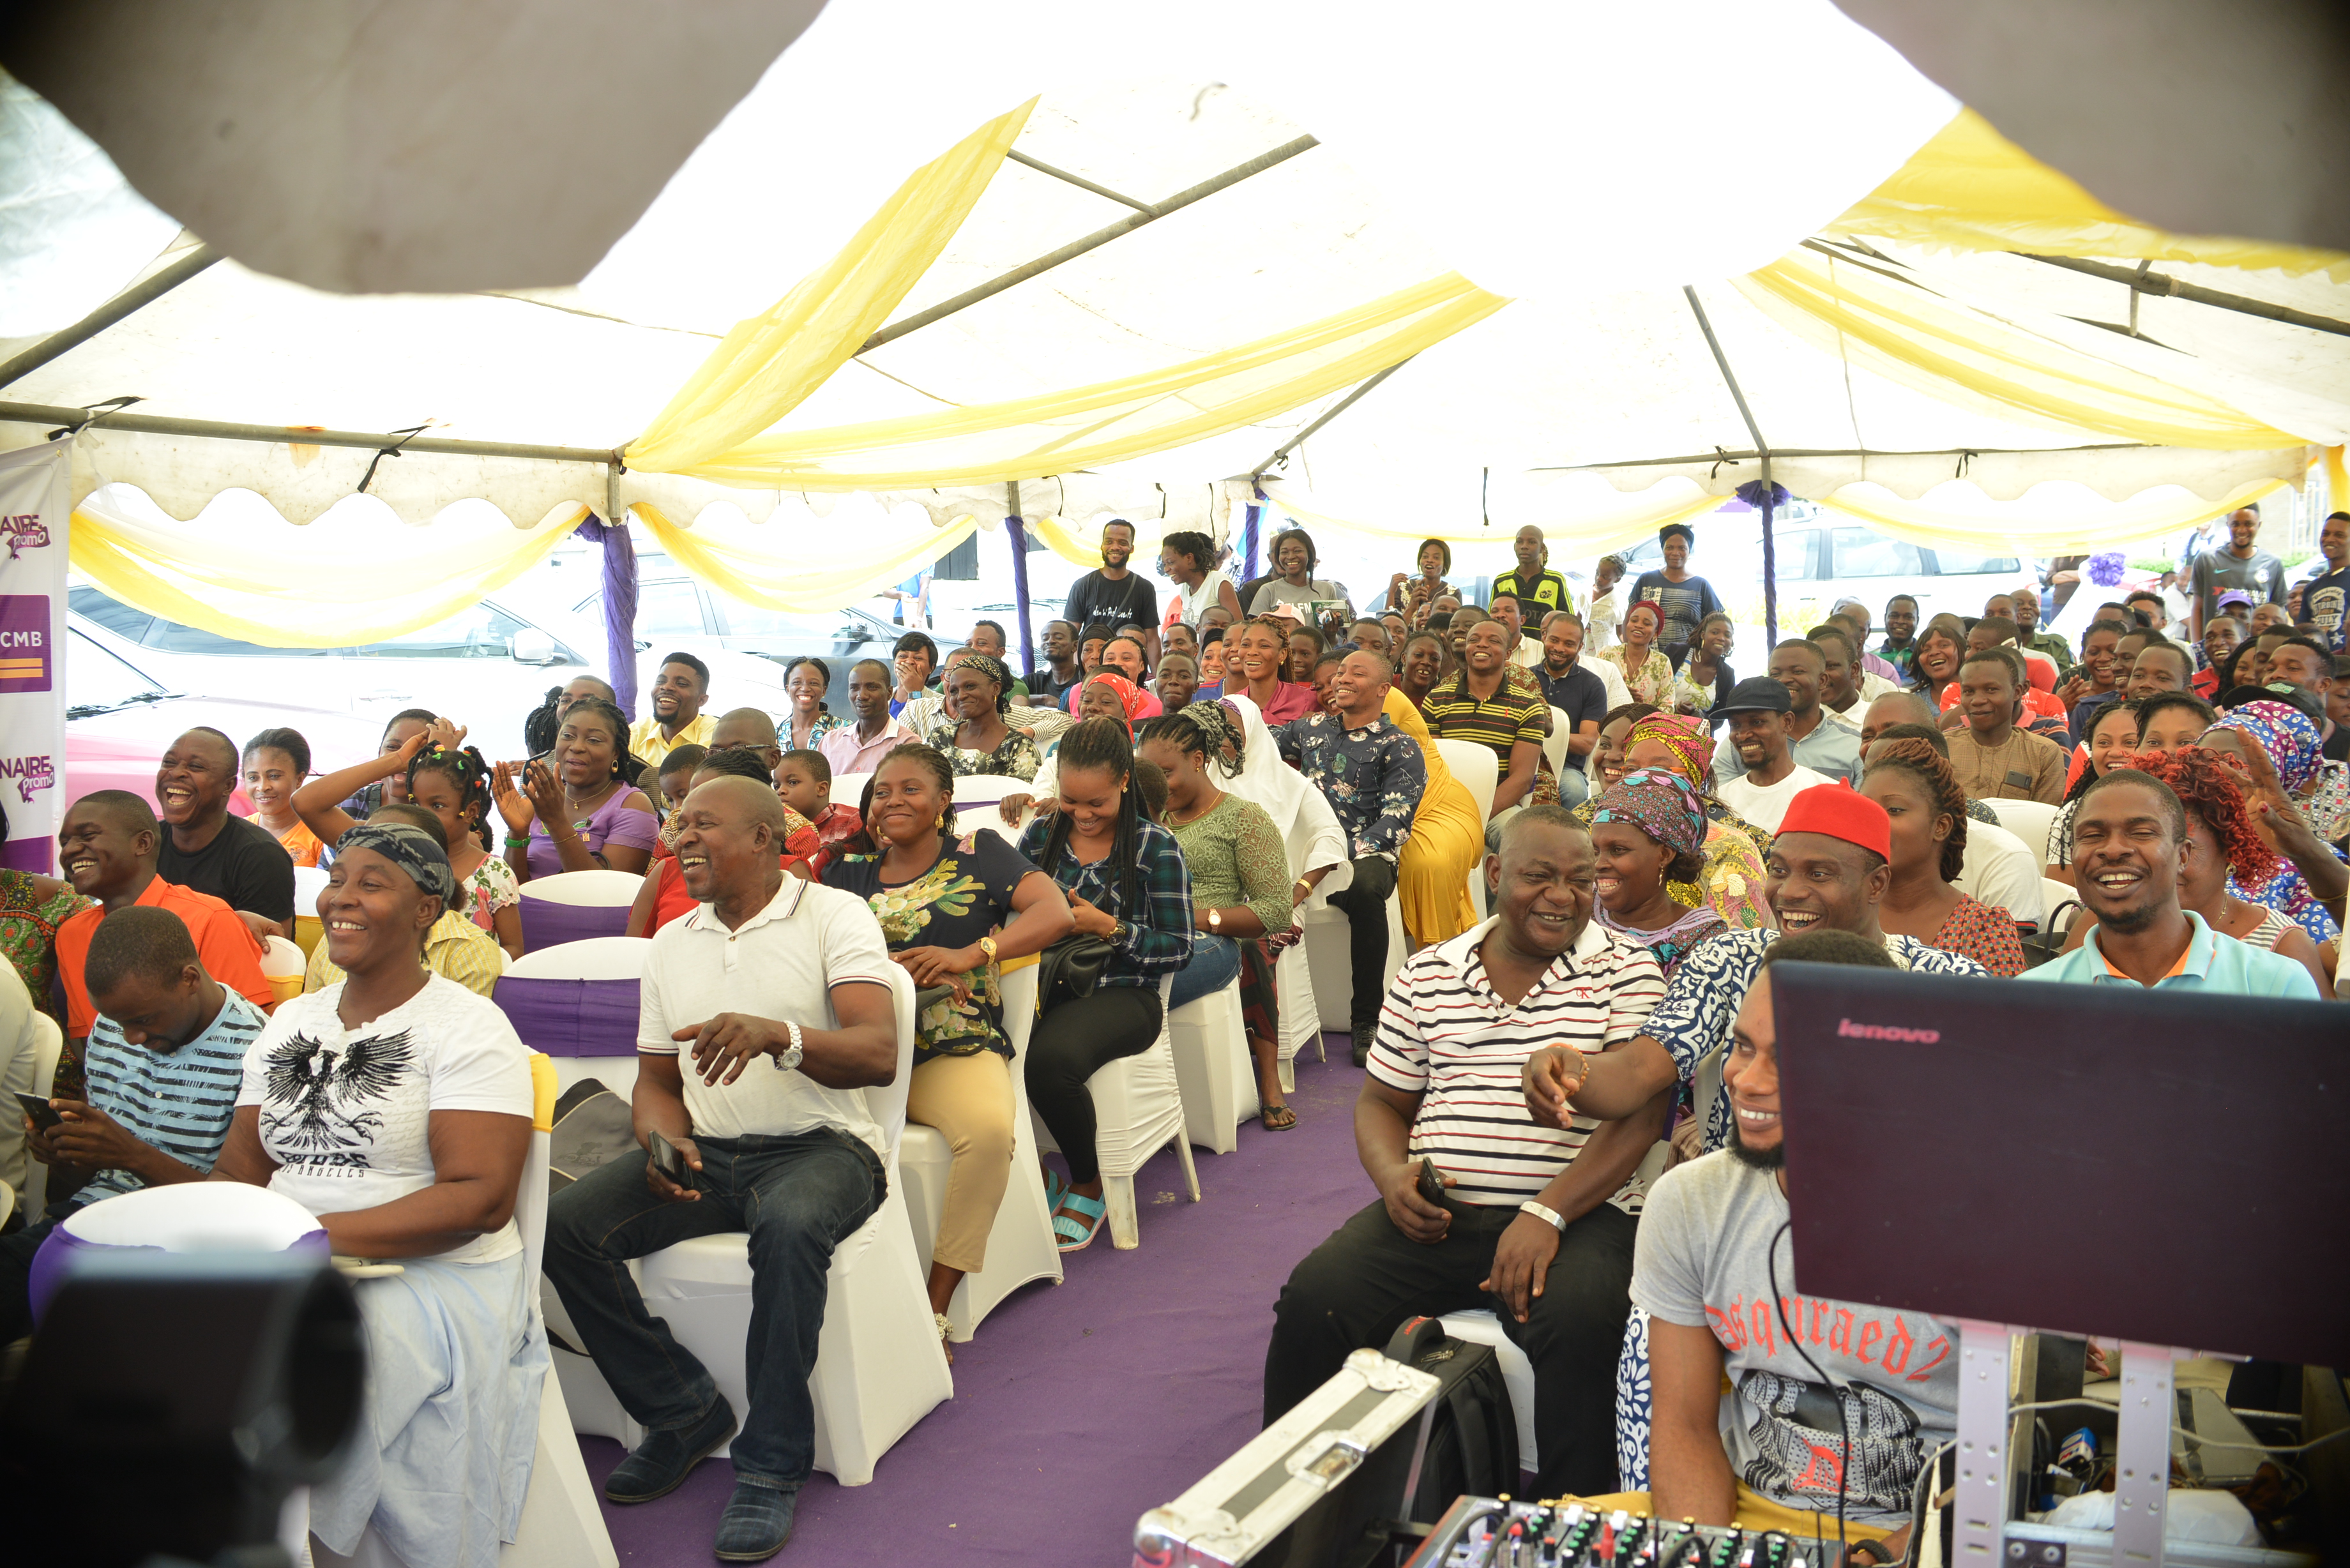 FCMB rewards hundreds of customers in the second draws of “Millionaire Promo Season 6’’